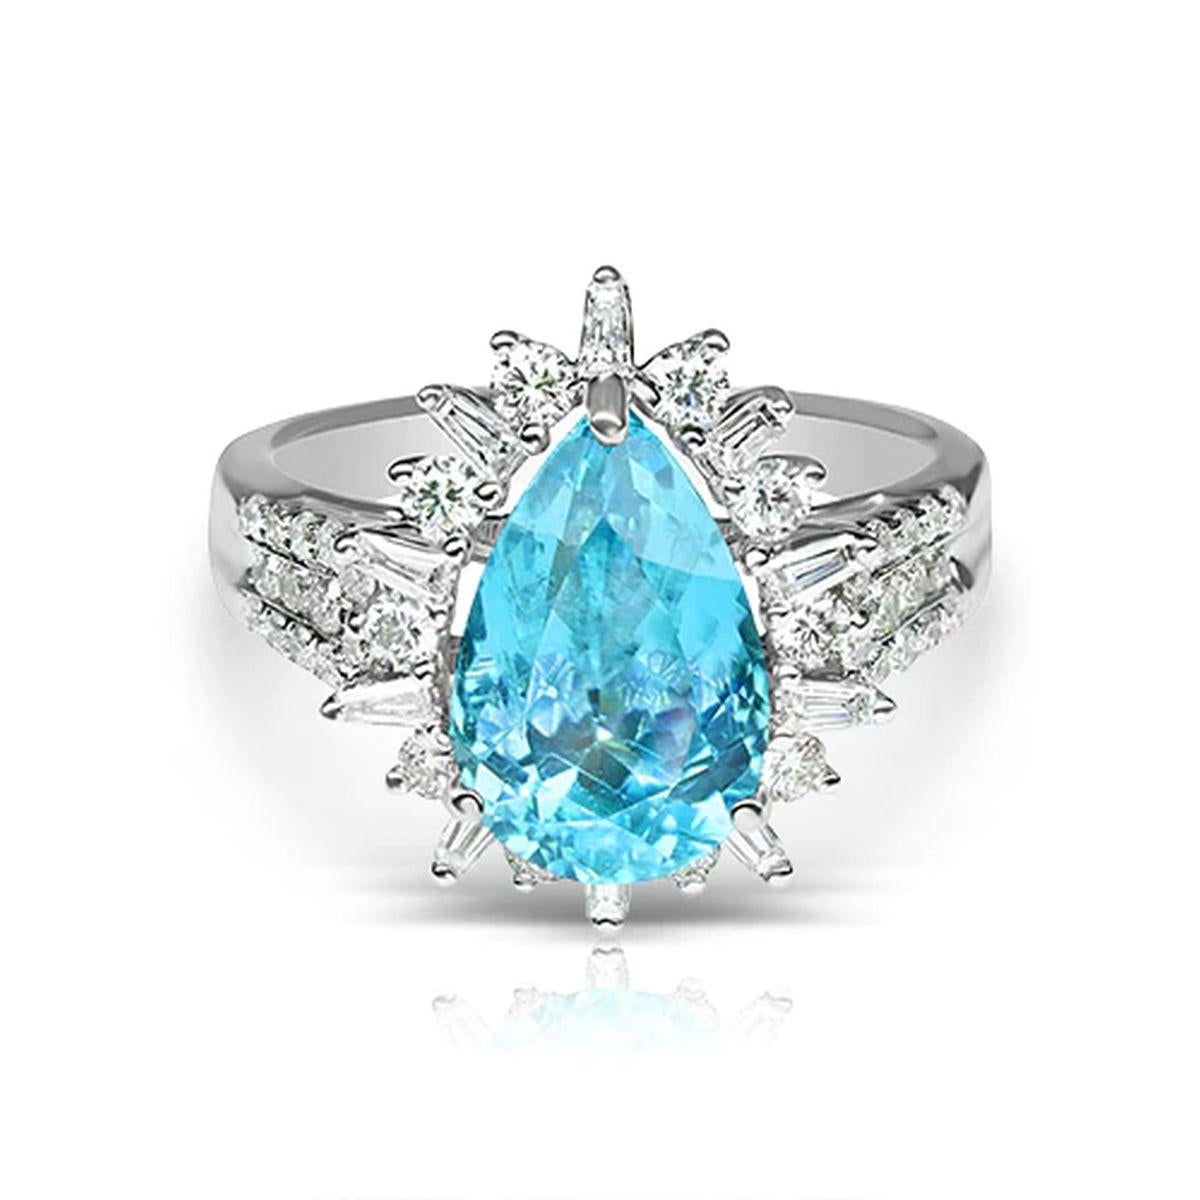 Simply Beautiful! Finely detailed GIA Pear shaped Paraiba Tourmaline and Diamond Vintage Gold Cocktail Ring. Centering a securely nestled Hand set 3.29 Carat Pear Neon Blue/Green Paraiba Tourmaline. Surrounded by Diamonds, E/F, VS, weighing approx.